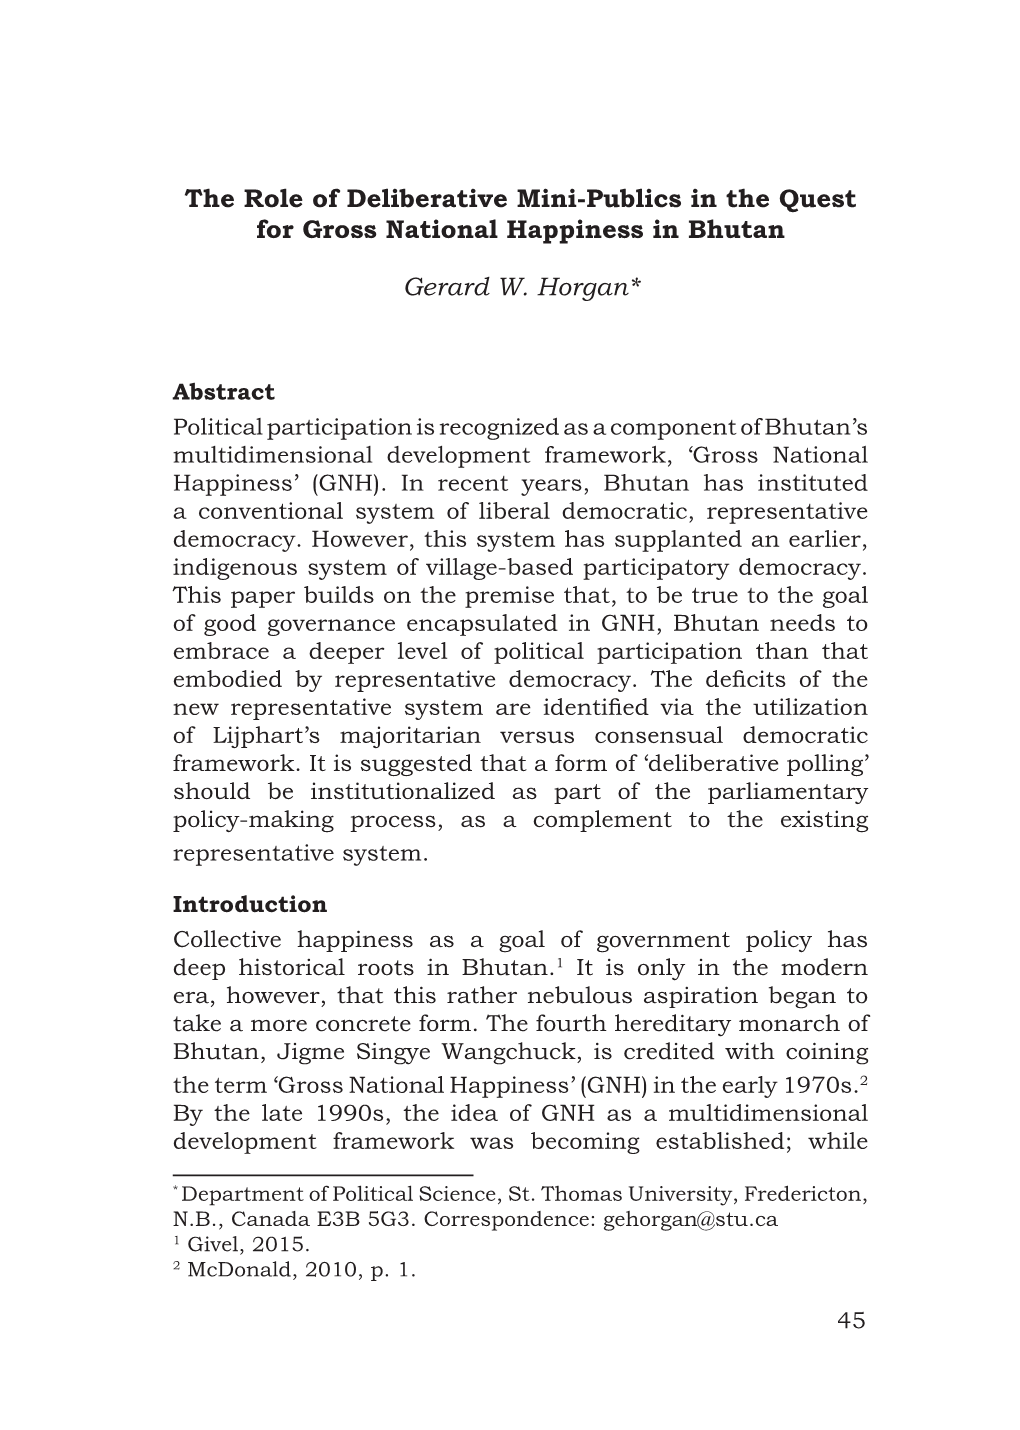 The Role of Deliberative Mini-Publics in the Quest for Gross National Happiness in Bhutan Gerard W. Horgan*